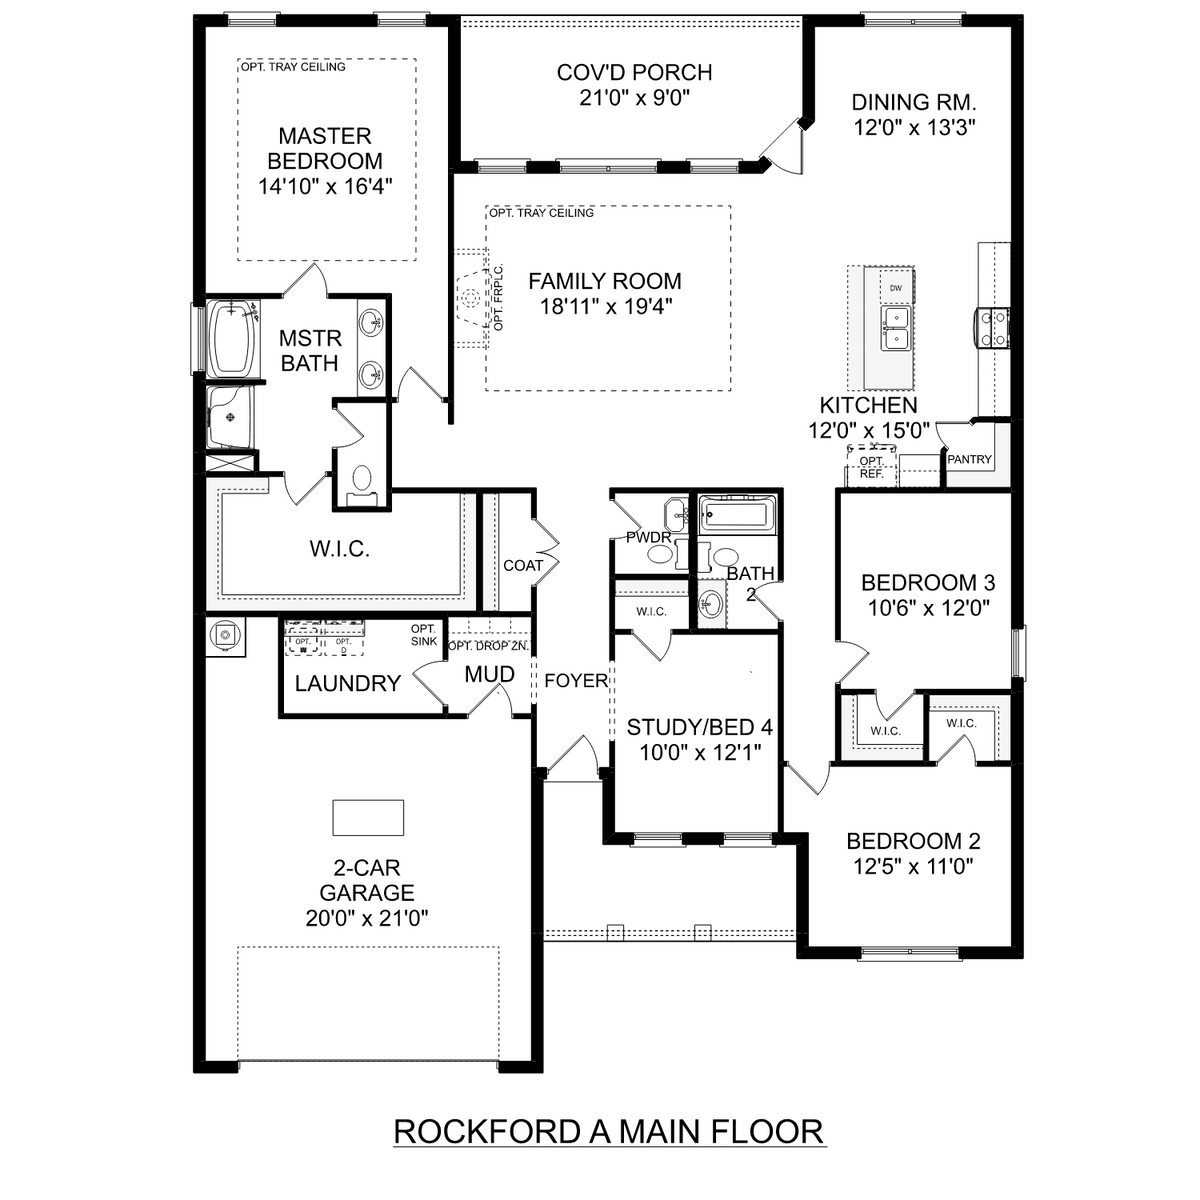 1 - The Rockford floor plan layout for 231 White Horse Way in Davidson Homes' Kendall Downs community.